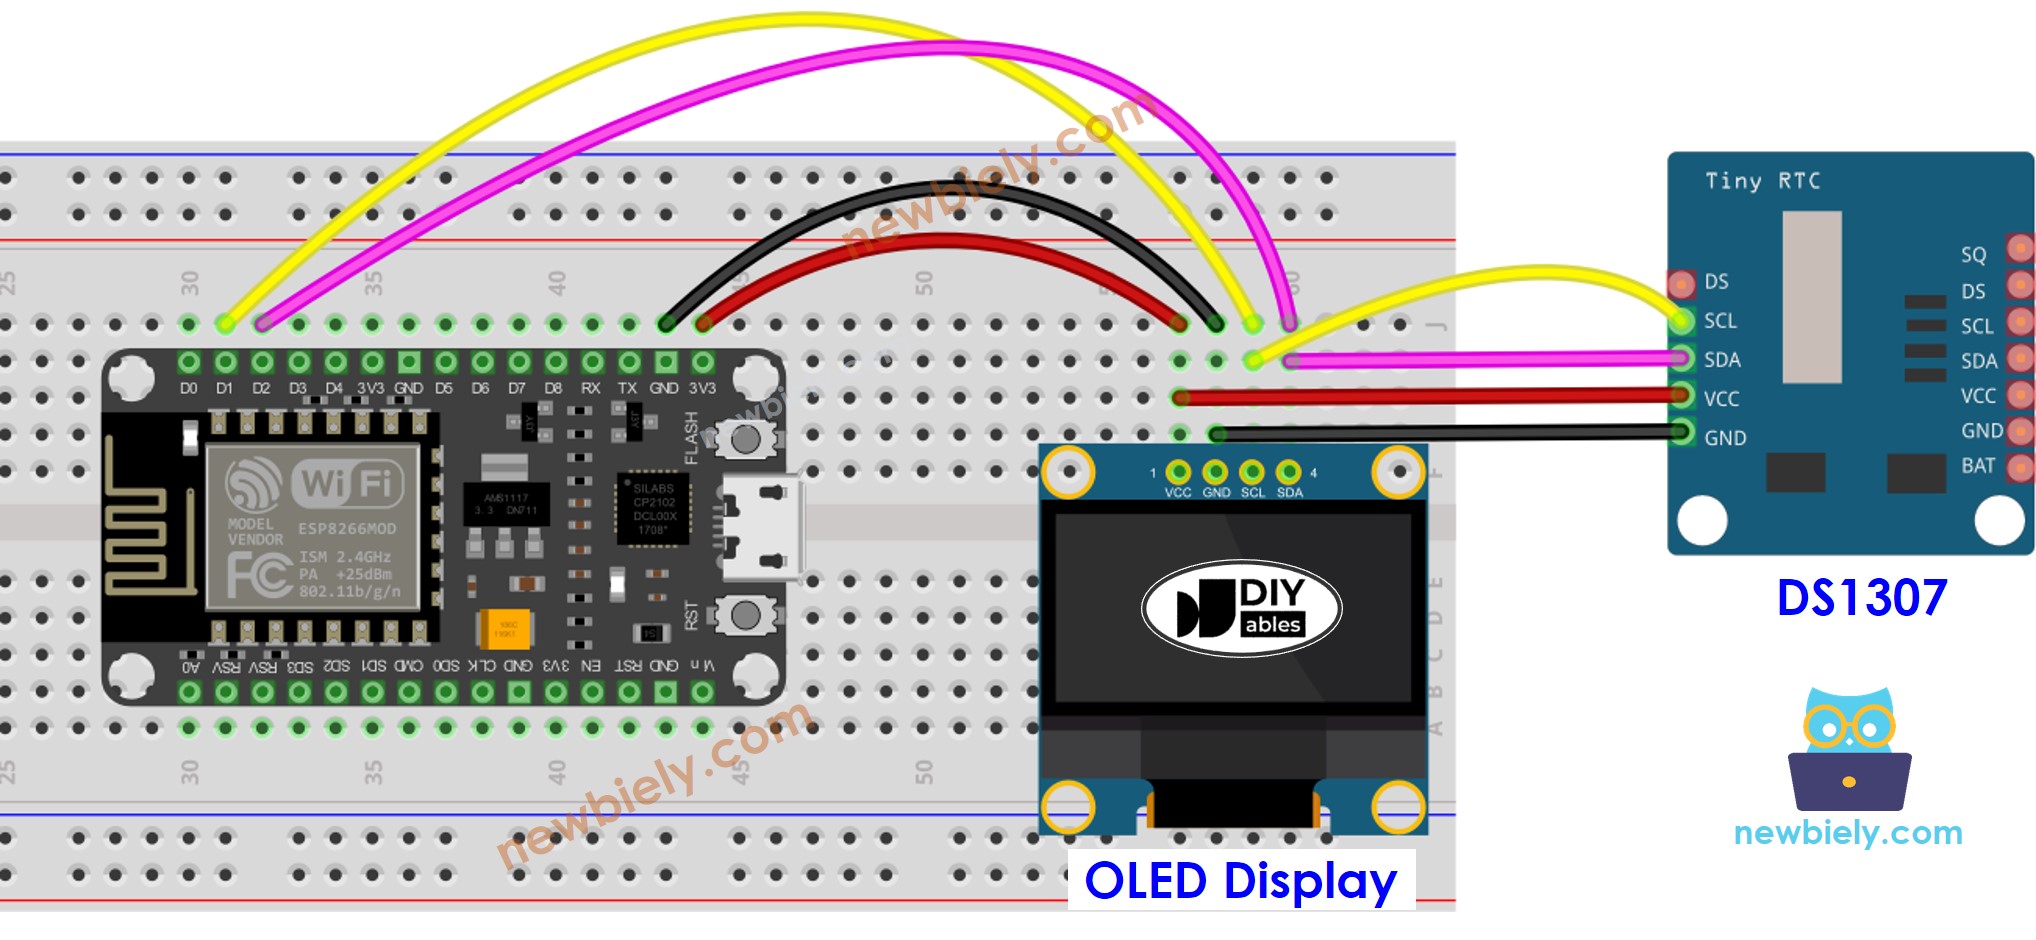 The wiring diagram between ESP8266 NodeMCU and DS1307 OLED